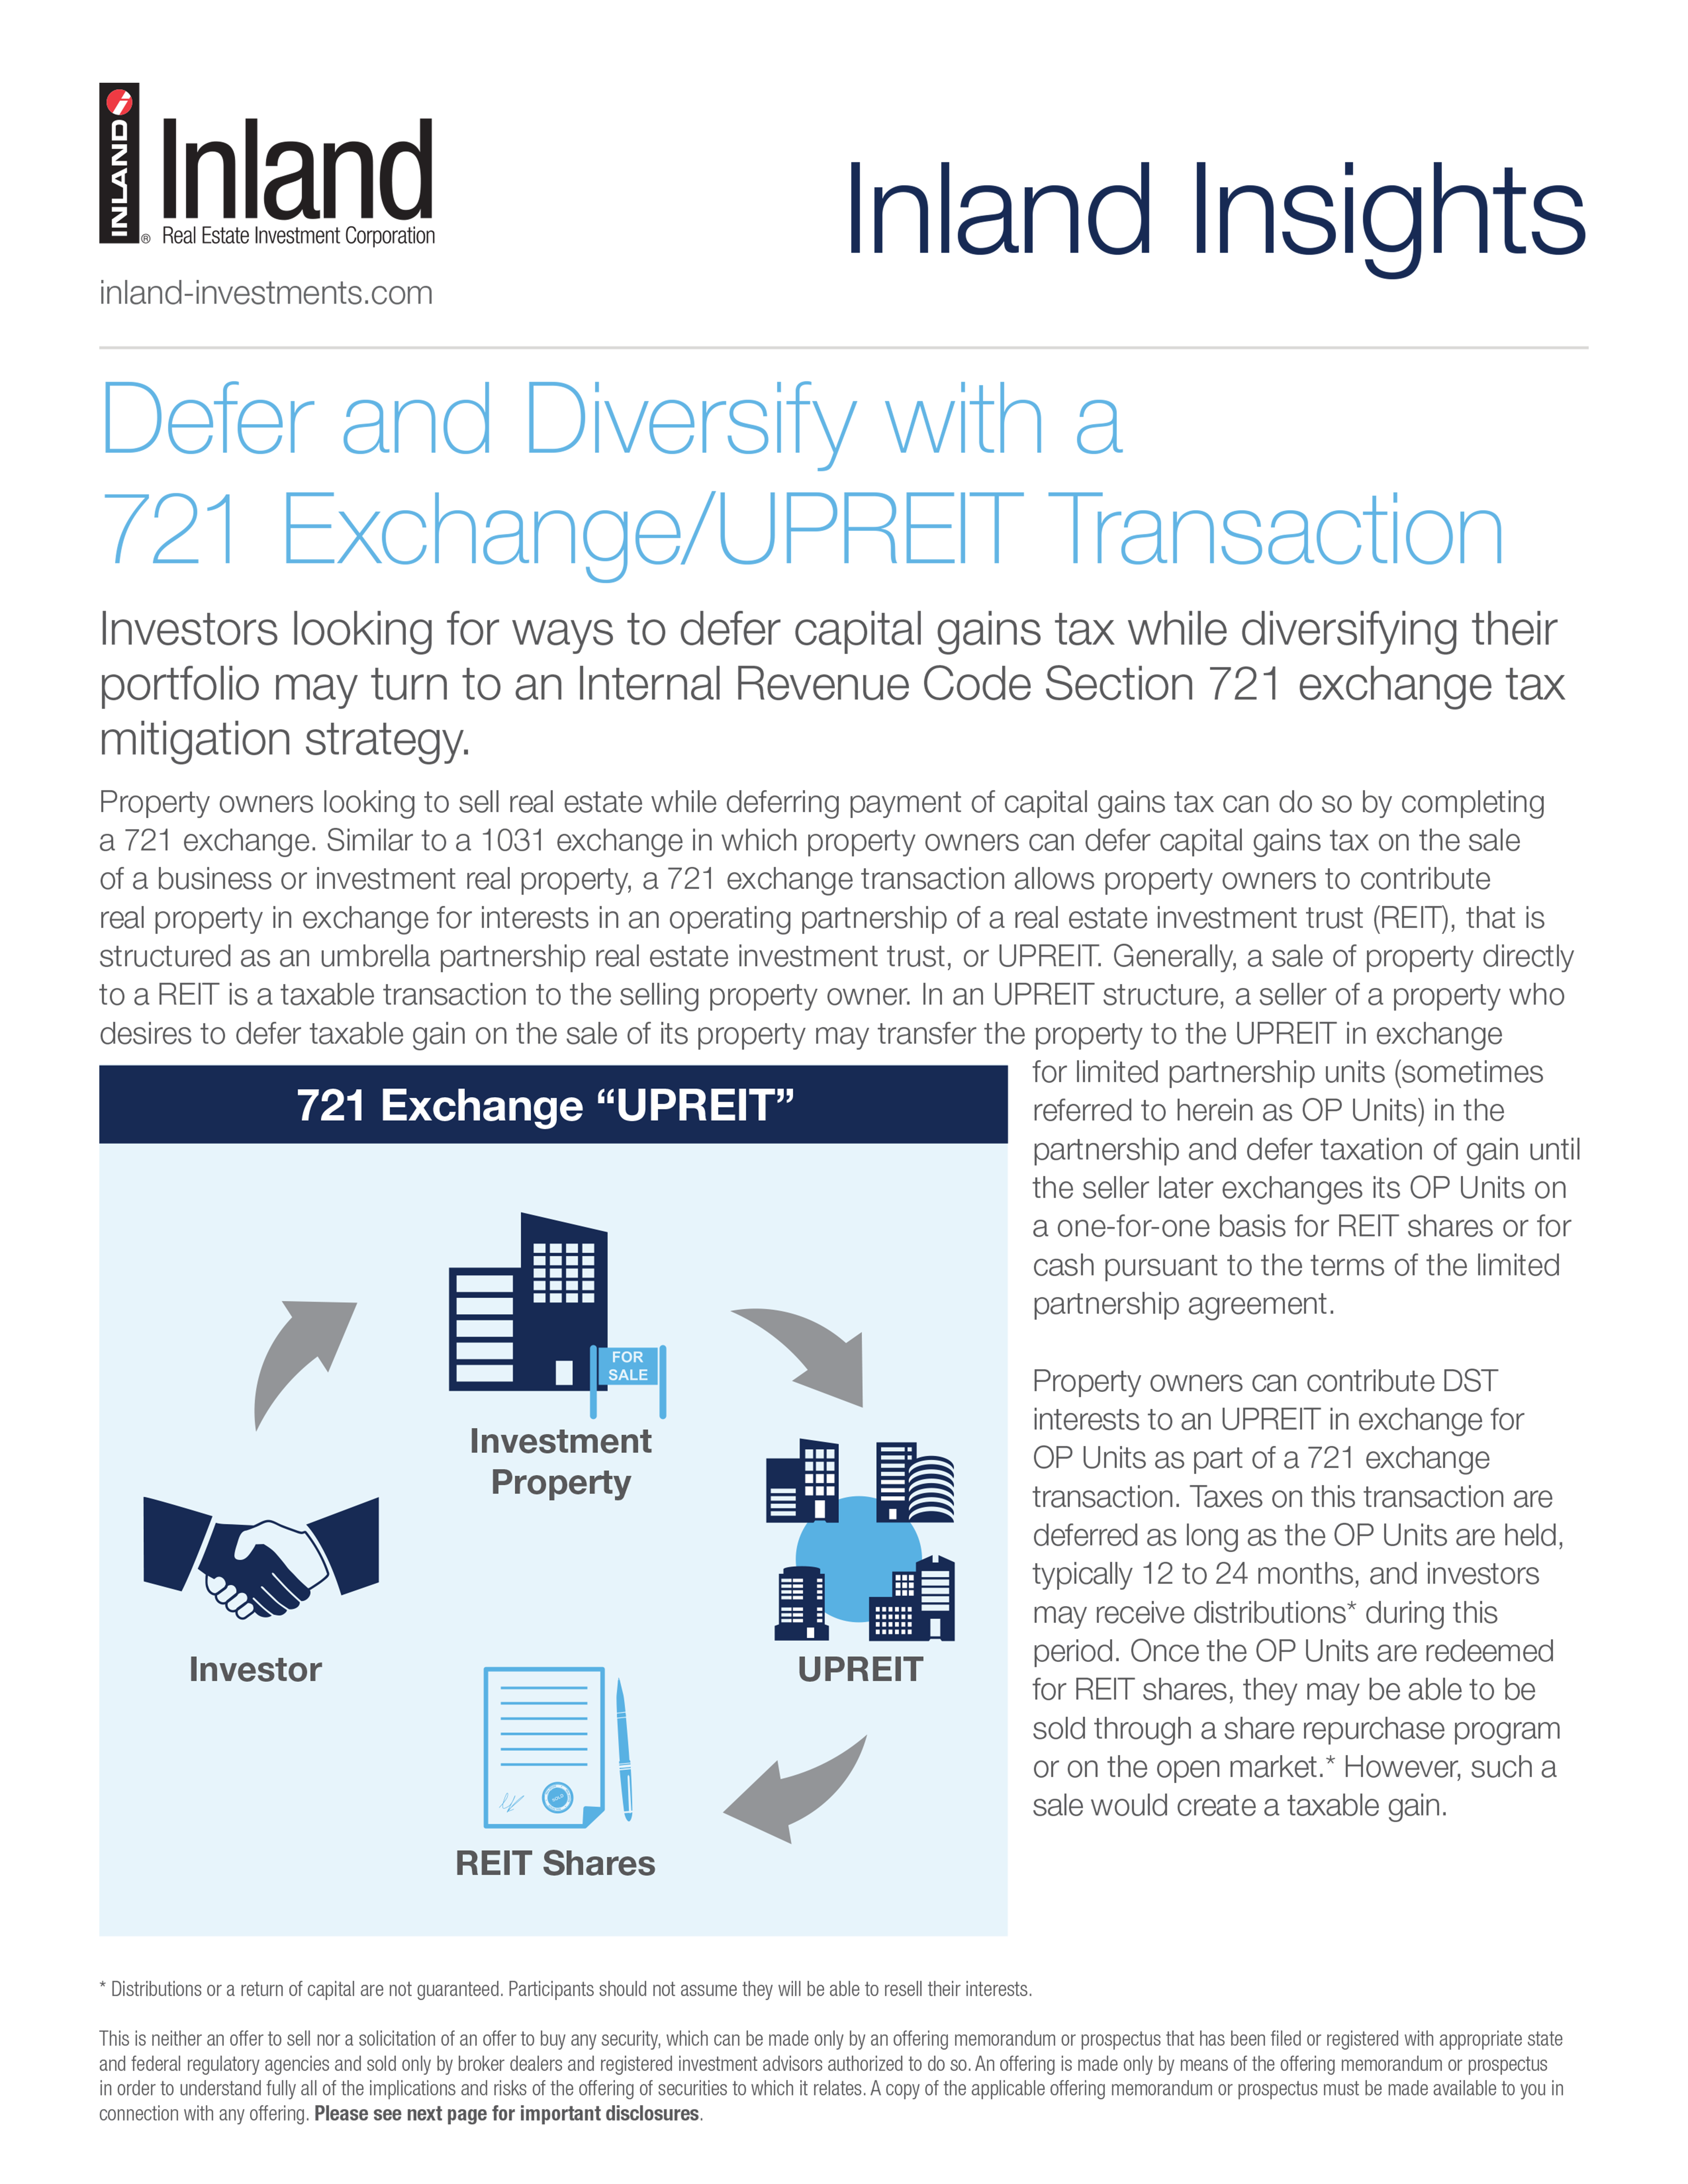 Defer and Diversify with a 721 ExchangeUPREIT Transaction | Beautyshot